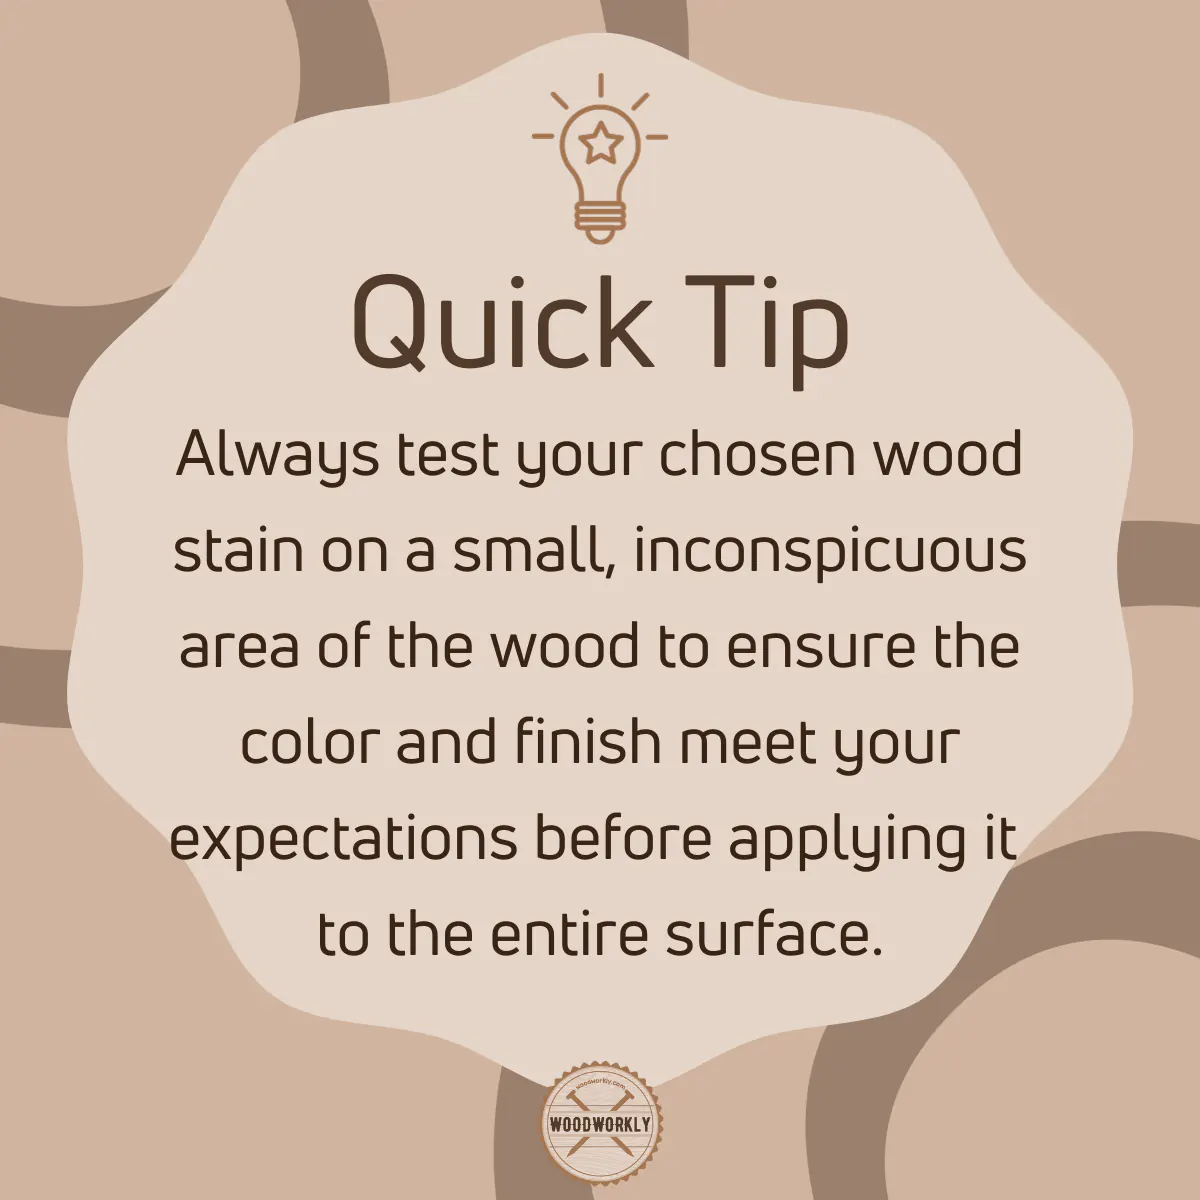 Tip for using stain